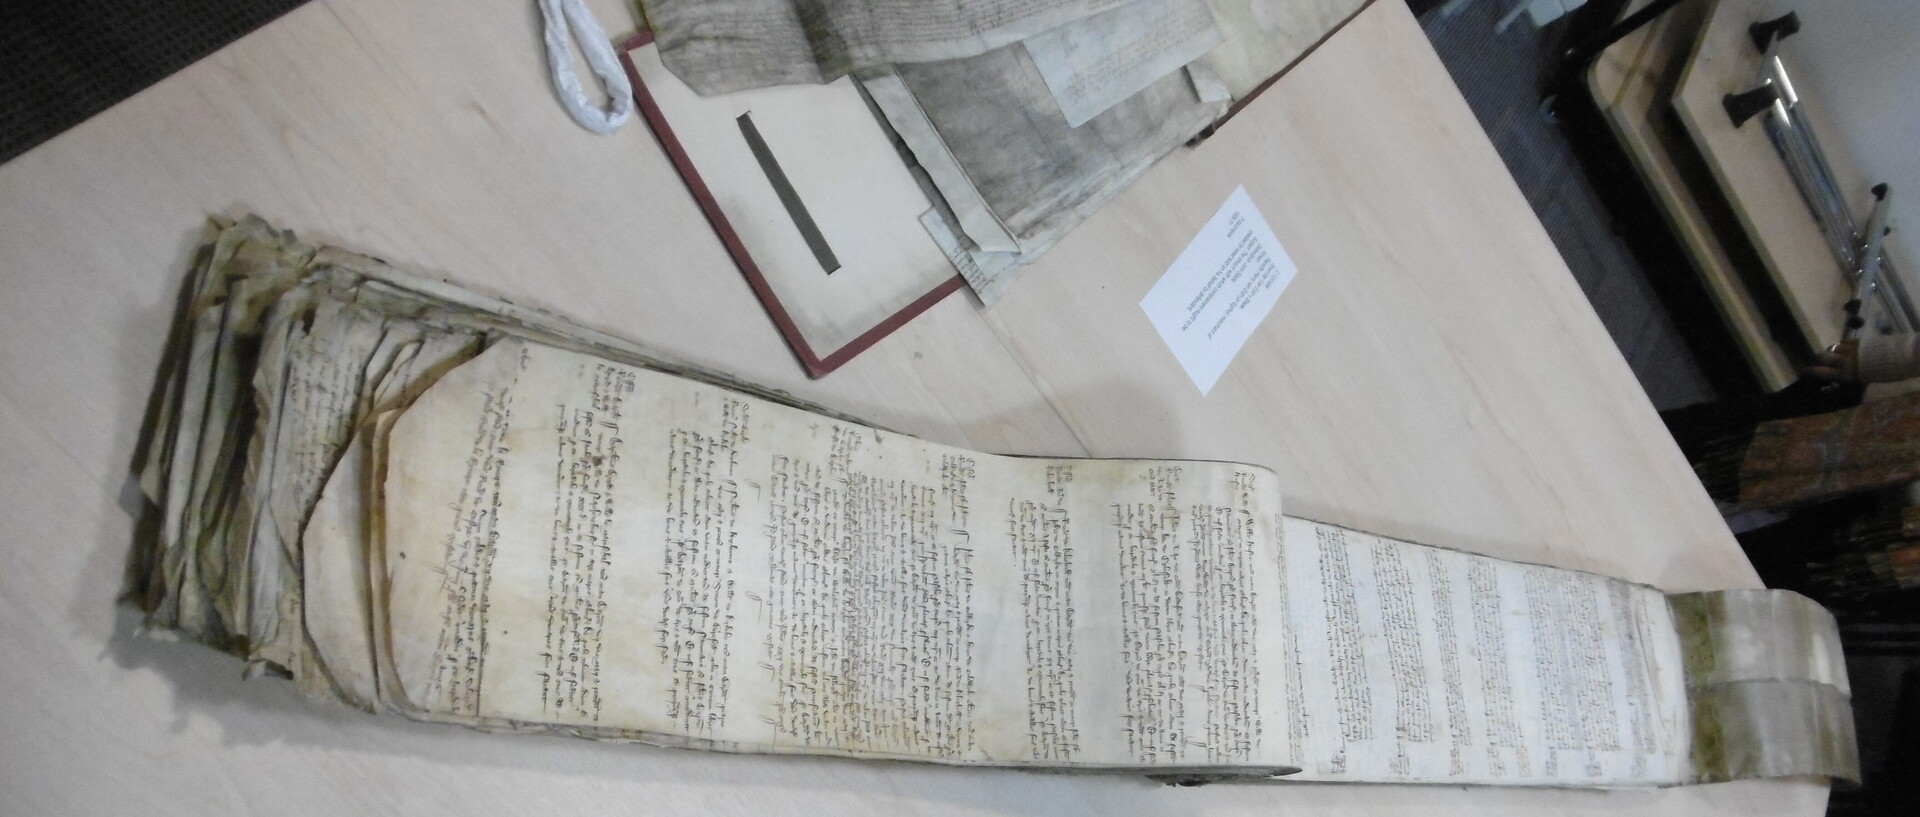 Picture of a Manuscript laid out on a table.